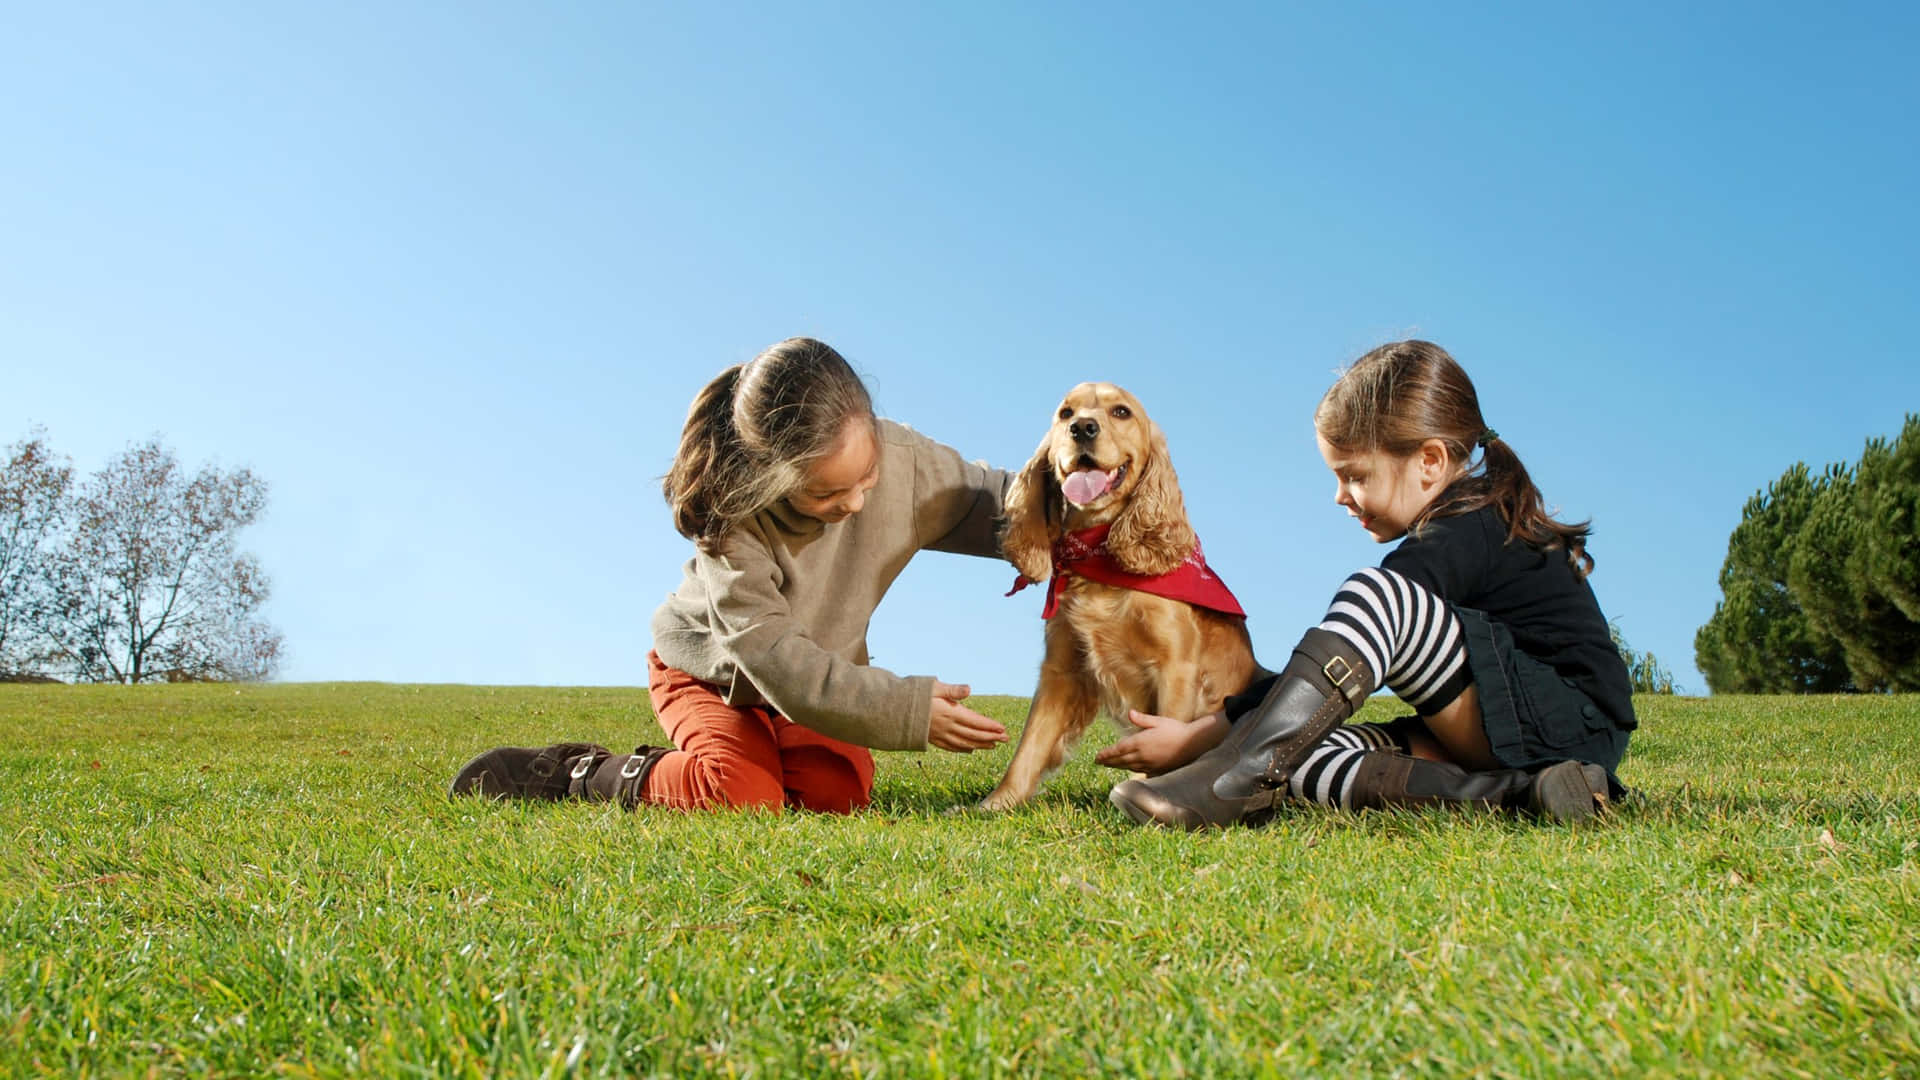 Three Children Playing With A Dog In The Grass